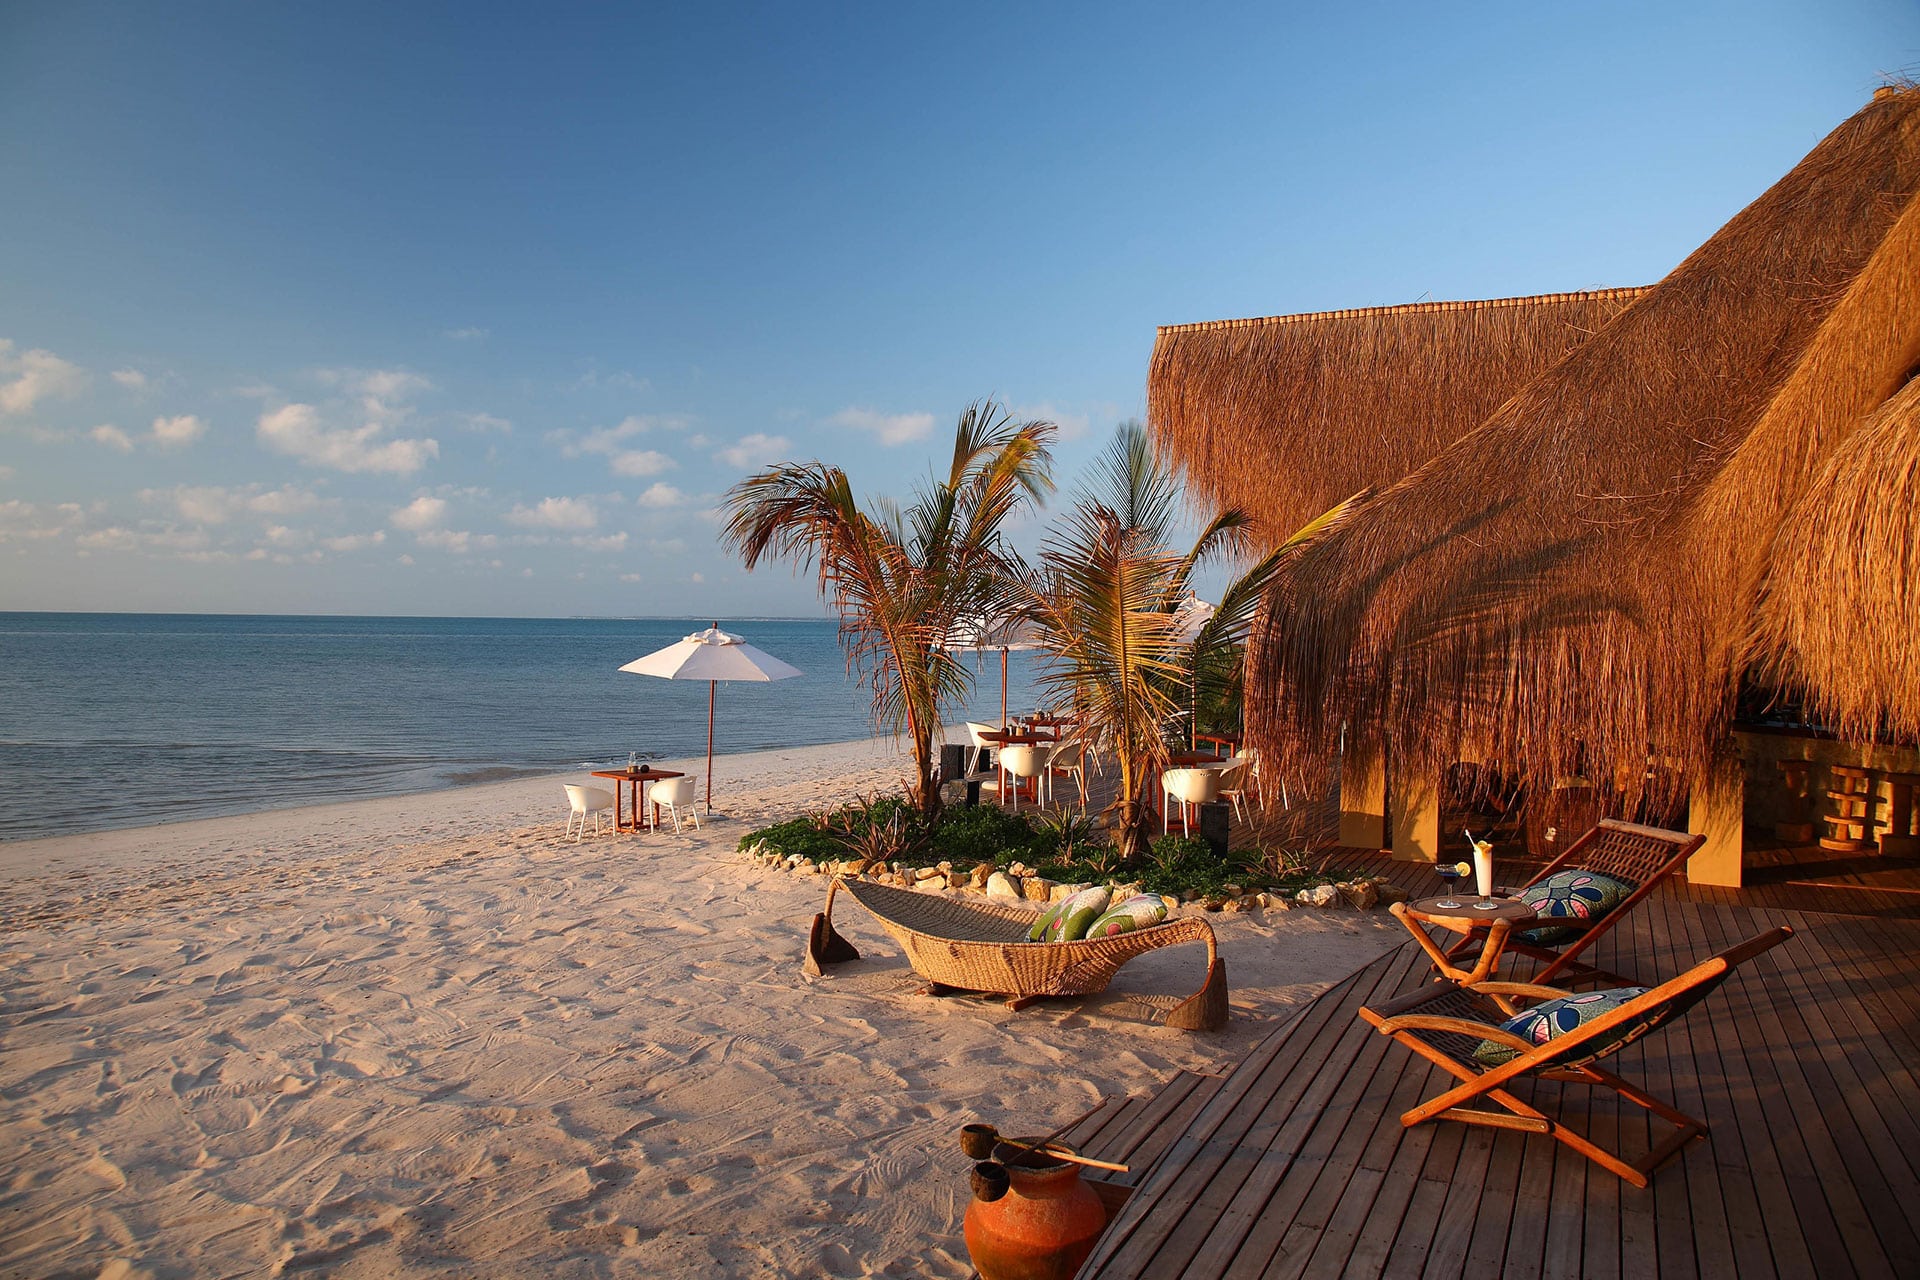 Azura Benguerra beach, this is located on one of the private islands in Africa